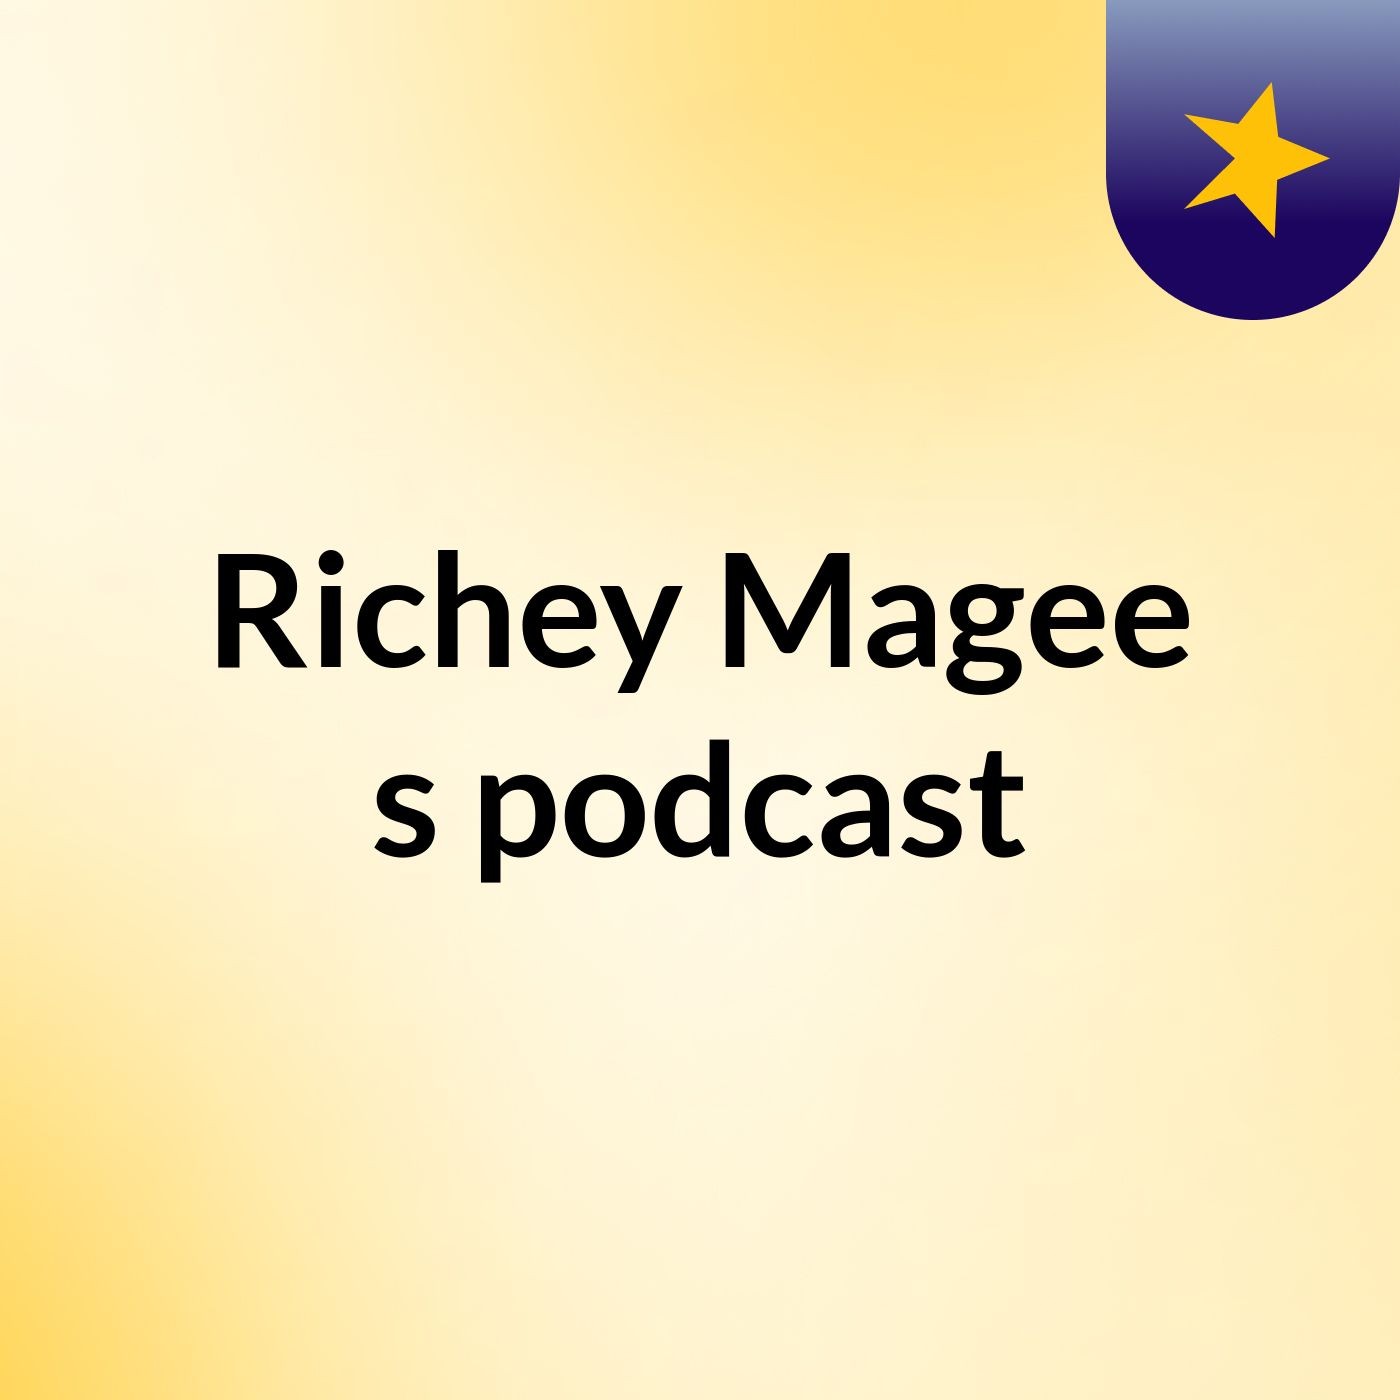 Richey Magee's podcast